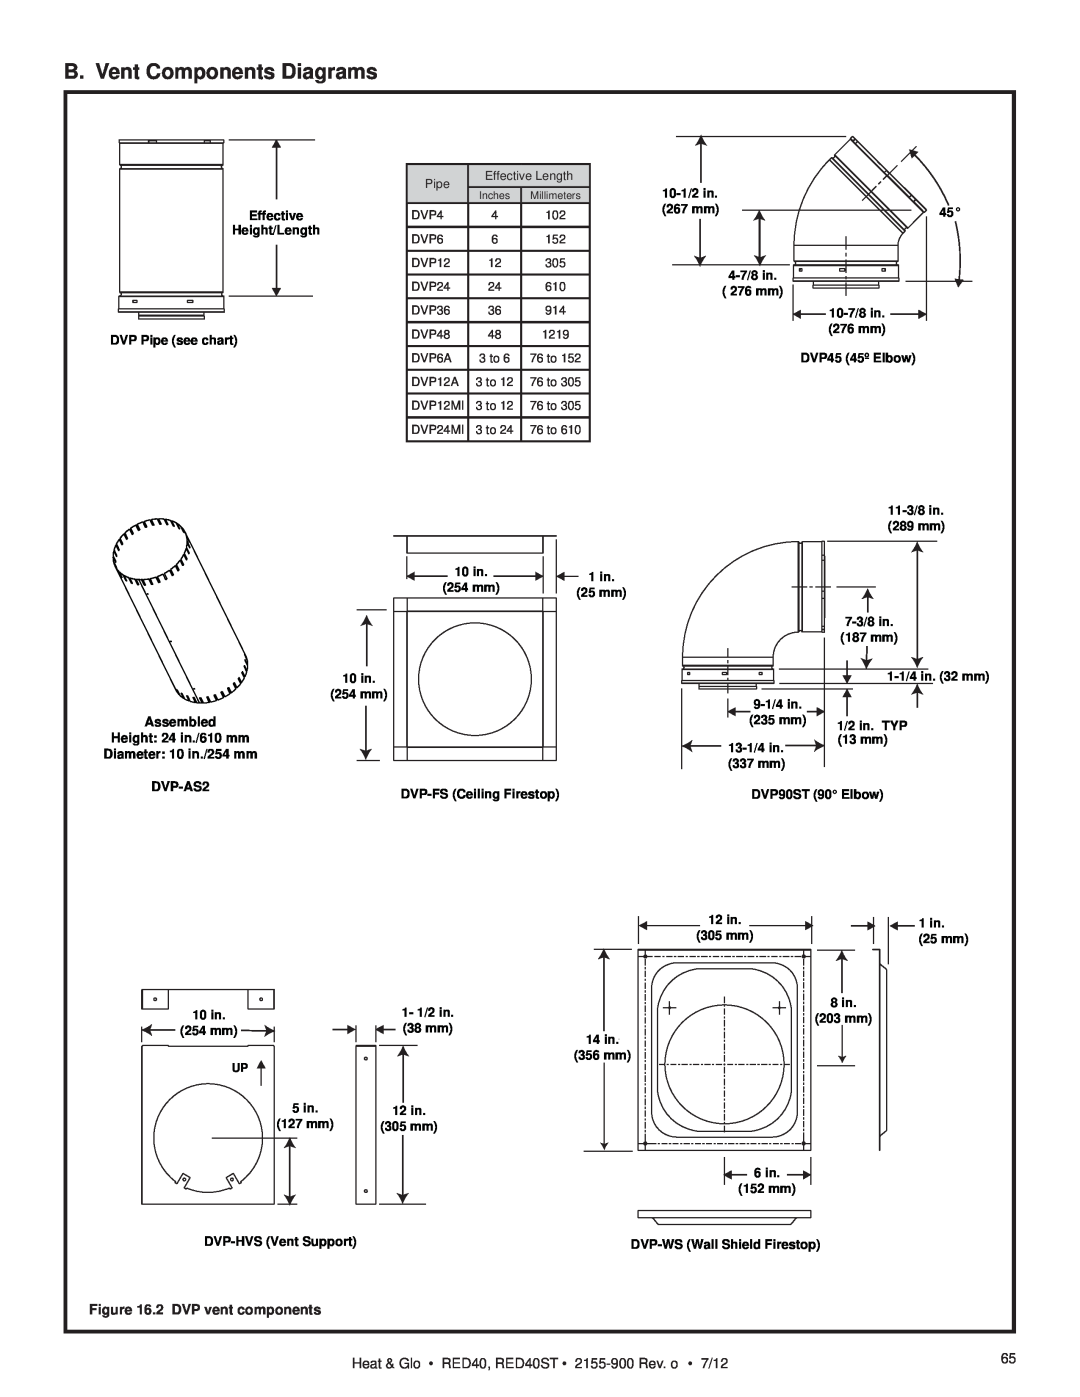 Heat & Glo LifeStyle RED40ST owner manual B. Vent Components Diagrams, 2 DVP vent components, • 7/12, DVP-AS2 